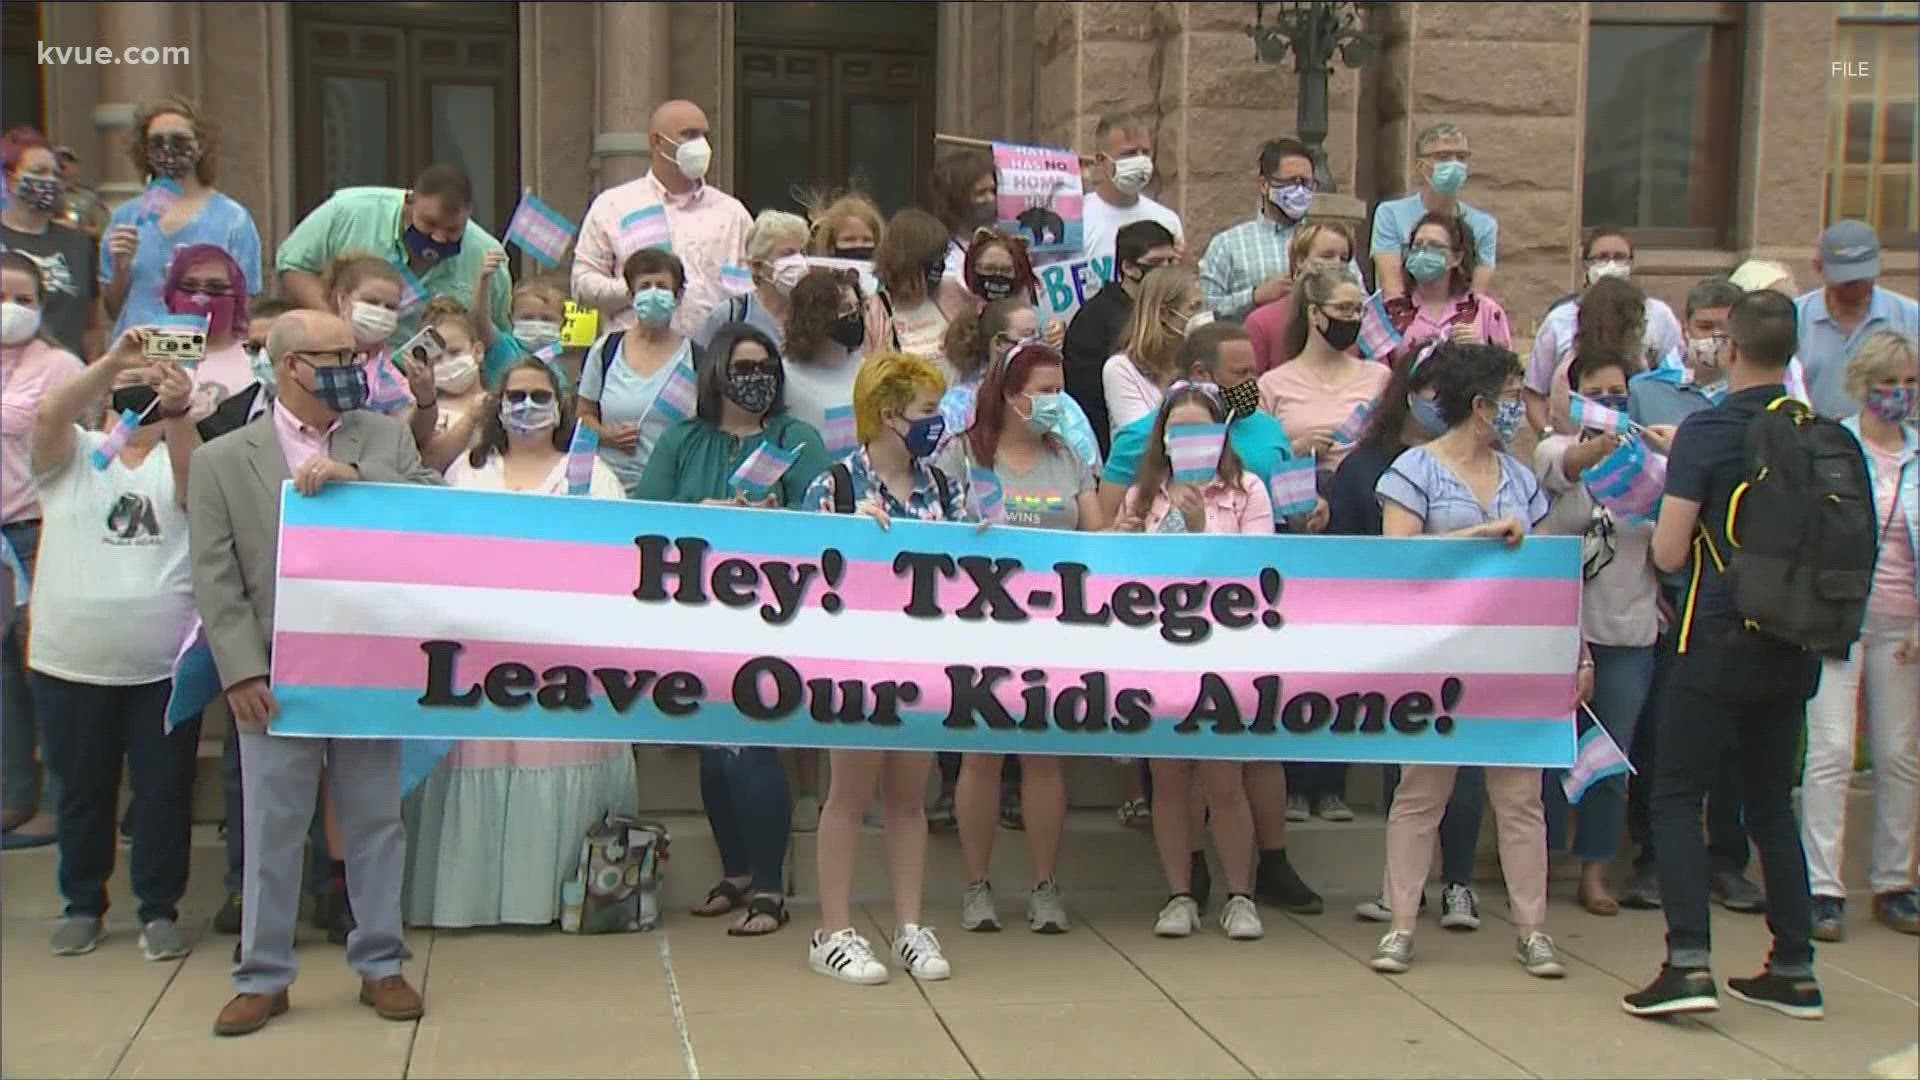 Gov. Greg Abbott has called sex modification "child abuse." Now, advocacy groups and schools are pushing back.